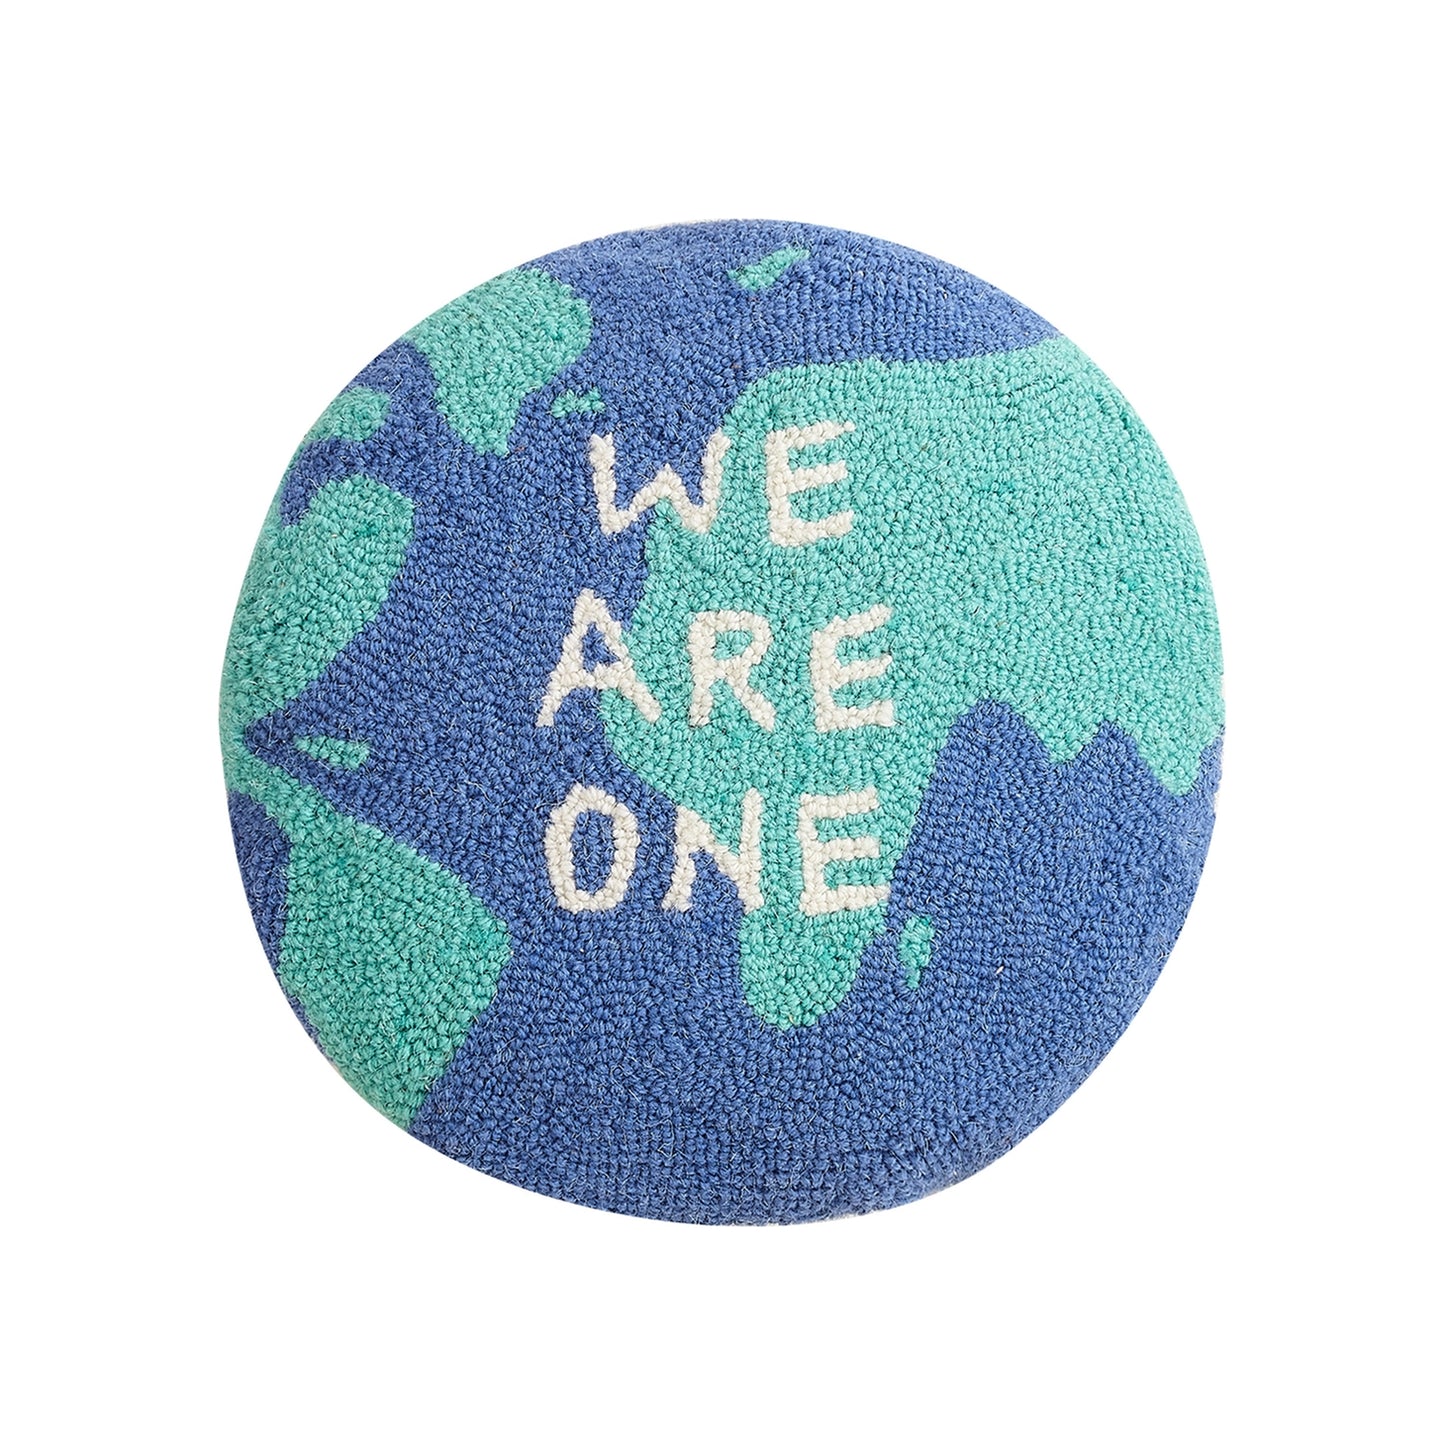 We Are One earth pillow